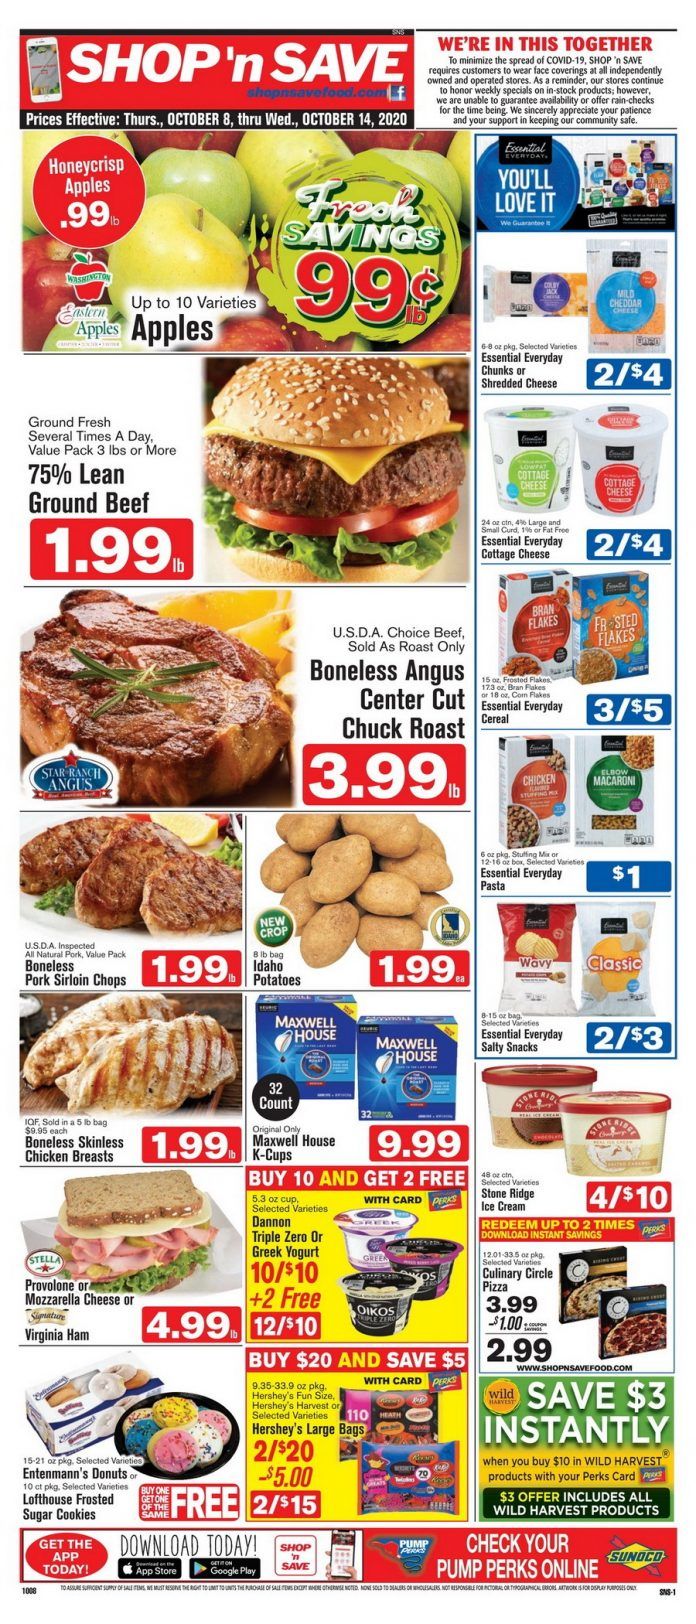 SHOP 'n SAVE Weekly Ad Oct 08 Oct 14, 2020